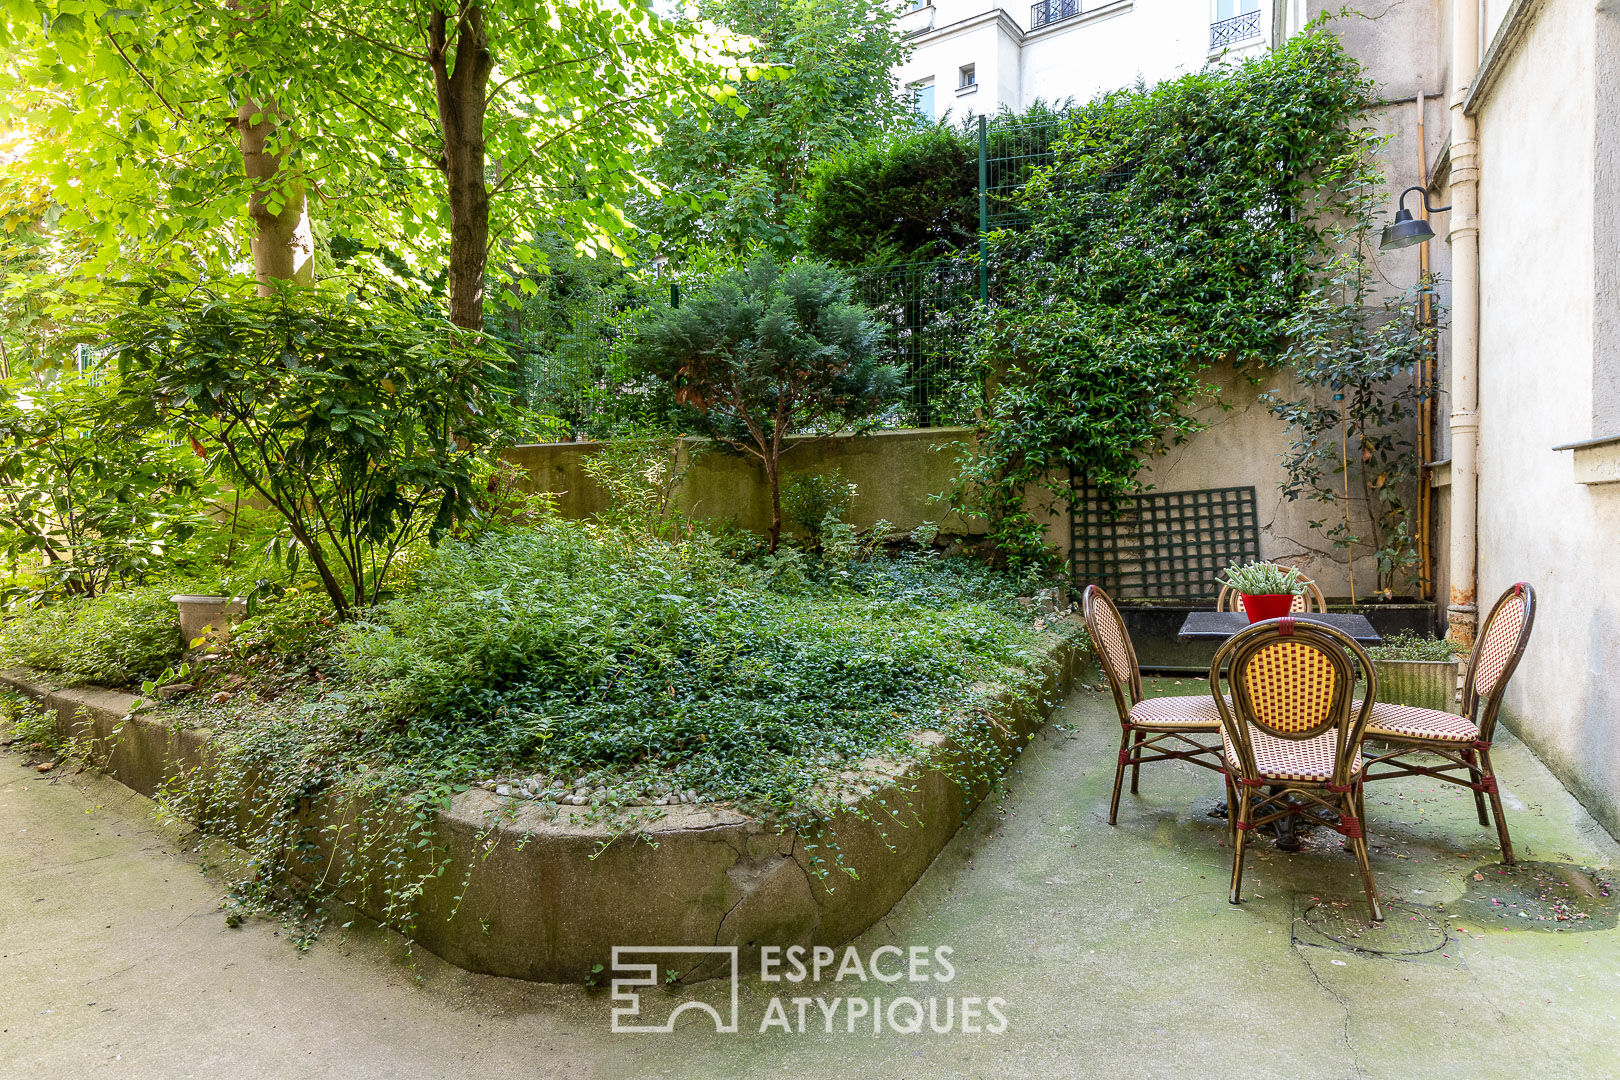 Apartment with Montmartre charm on garden